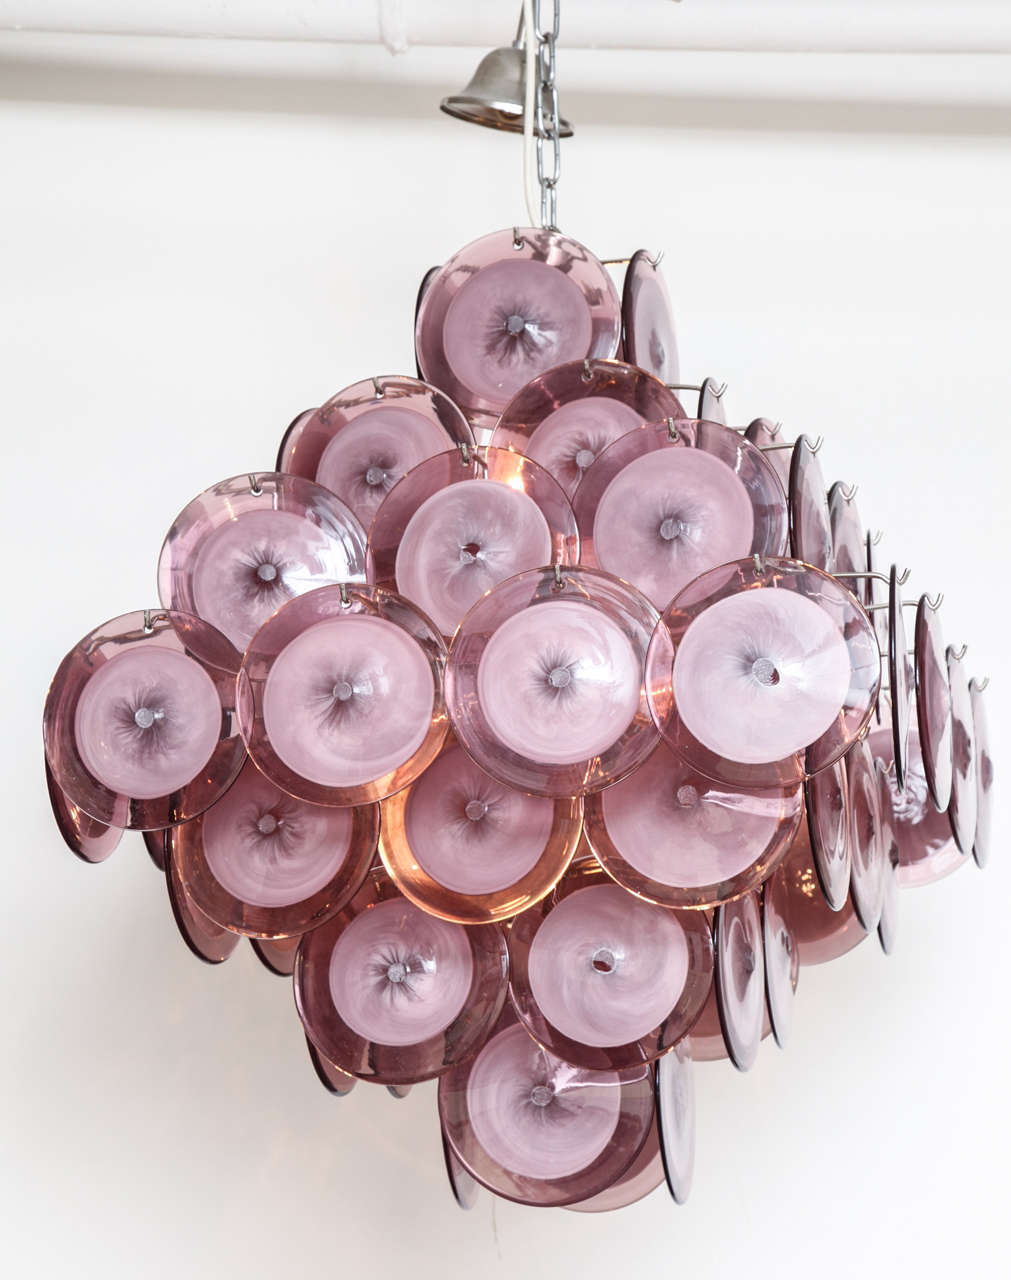 This double-sided pyramid disc chandelier is comprised of individually handblown purple or amethyst and white colored murano glass suspended from a chrome frame.  The color of the discs vary between amethyst, pink, lavender and light purple hues.